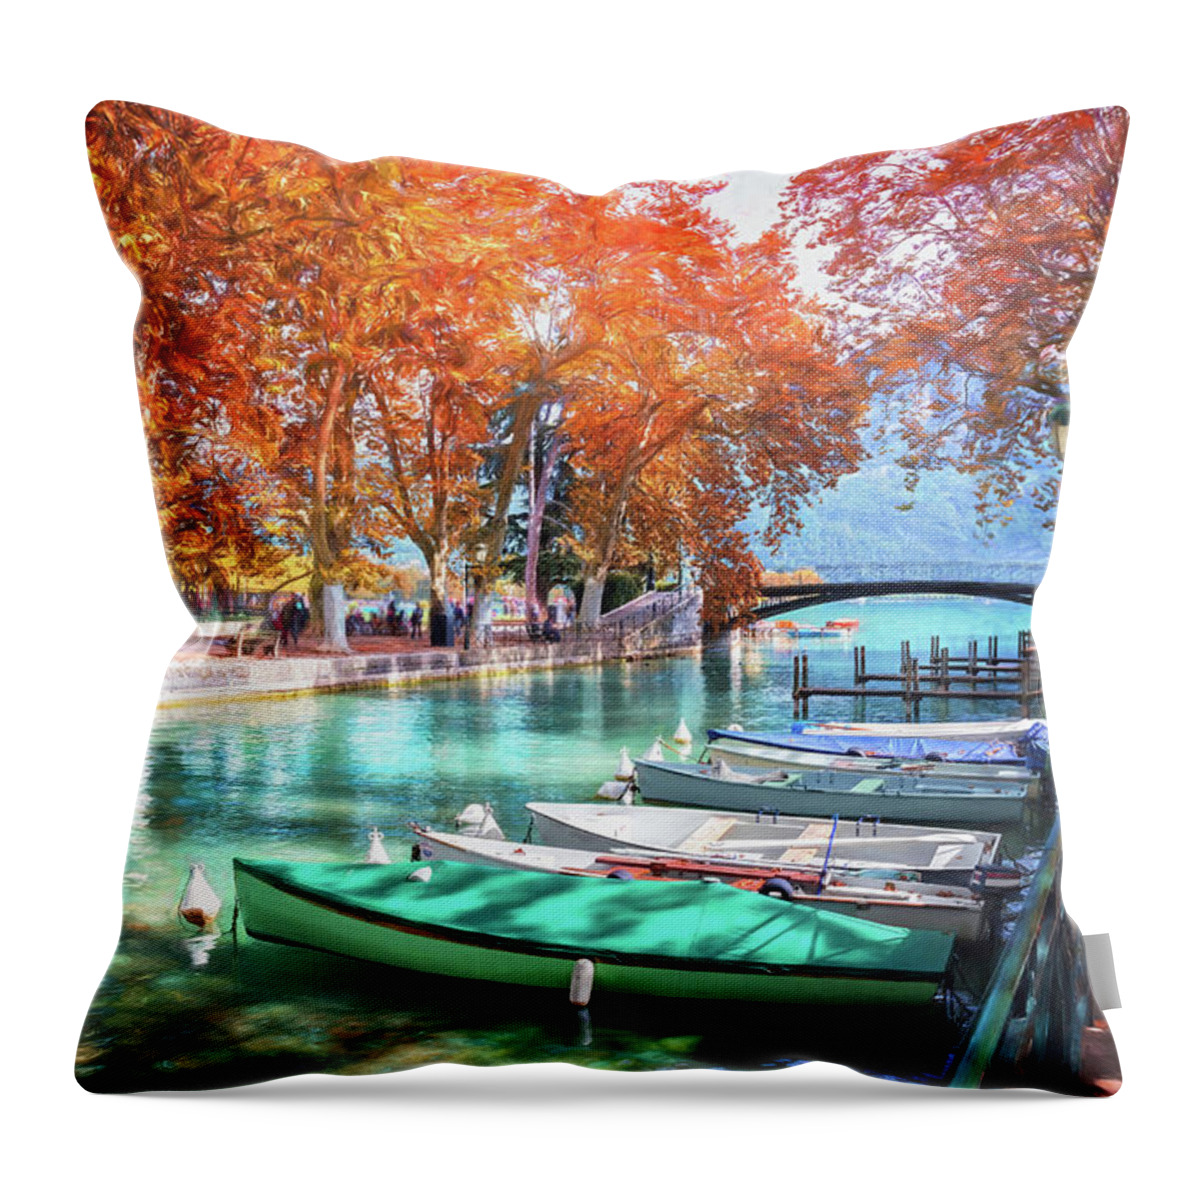 Annecy Throw Pillow featuring the photograph European Canal Scenes Annecy France by Carol Japp